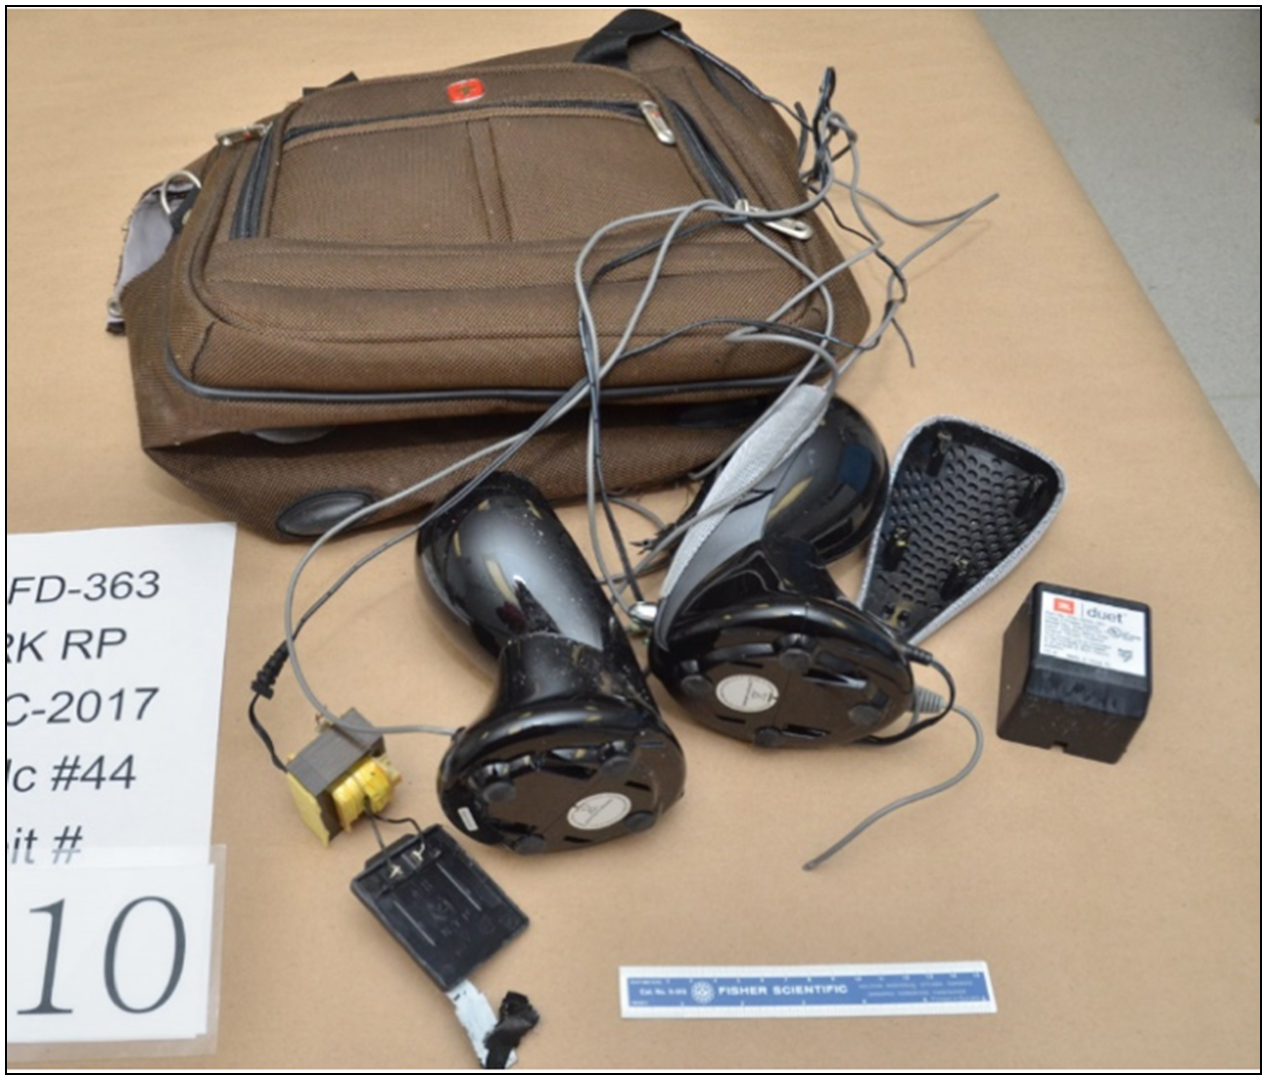 a fabric travel bag containing miscellaneous electrical components